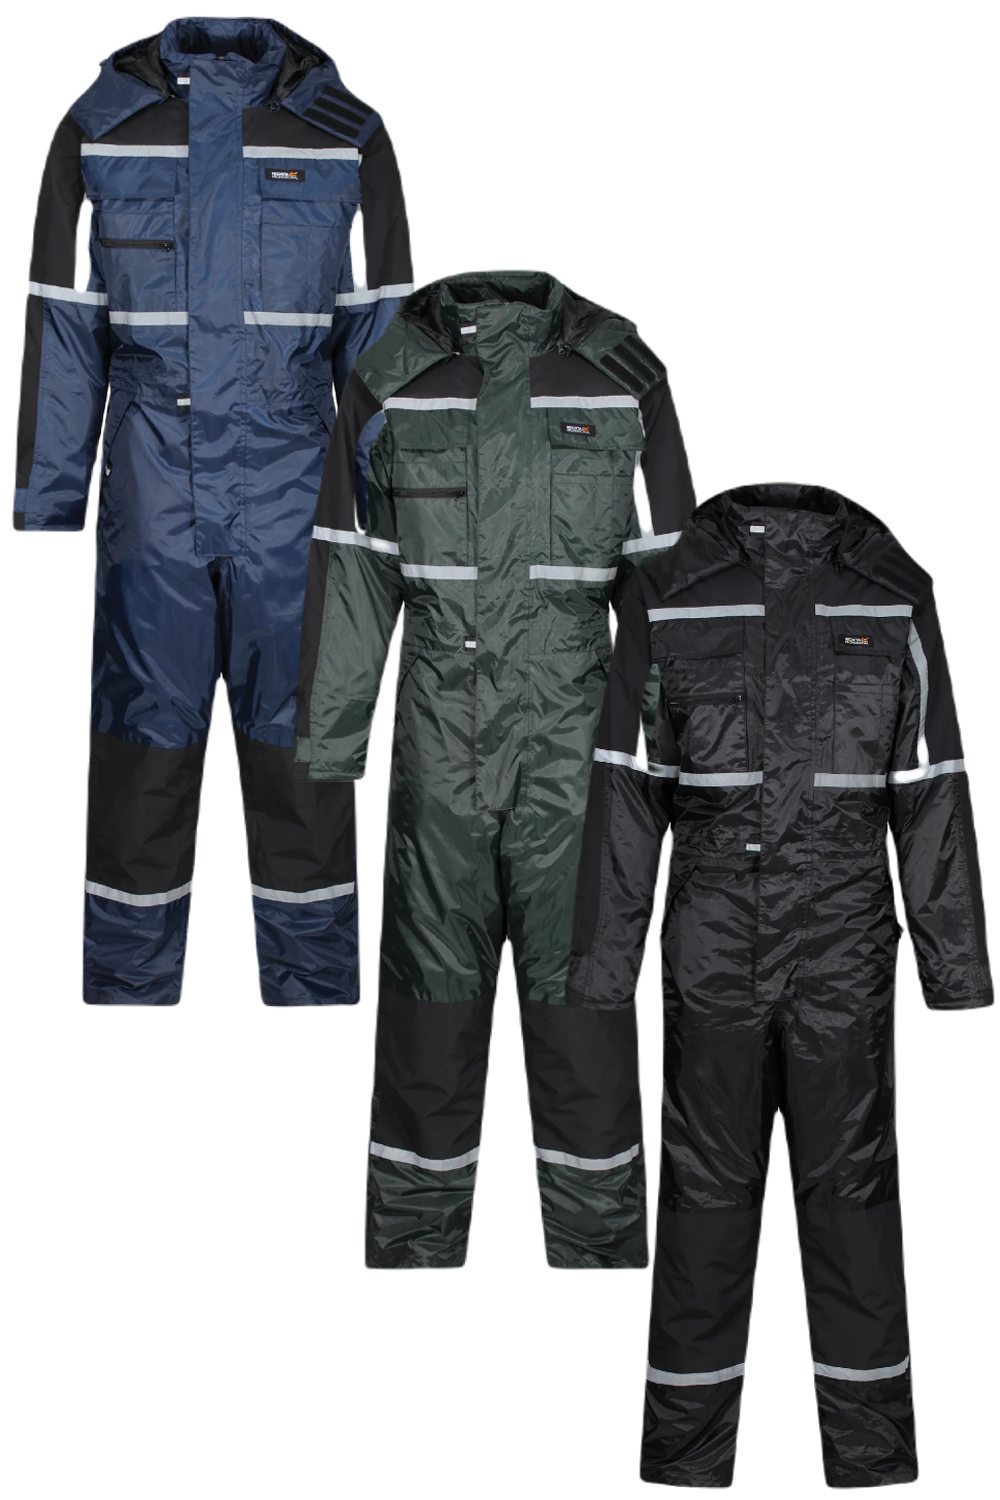 Regatta Pro Waterproof Insulated Coverall in Navy, Olive and Black 